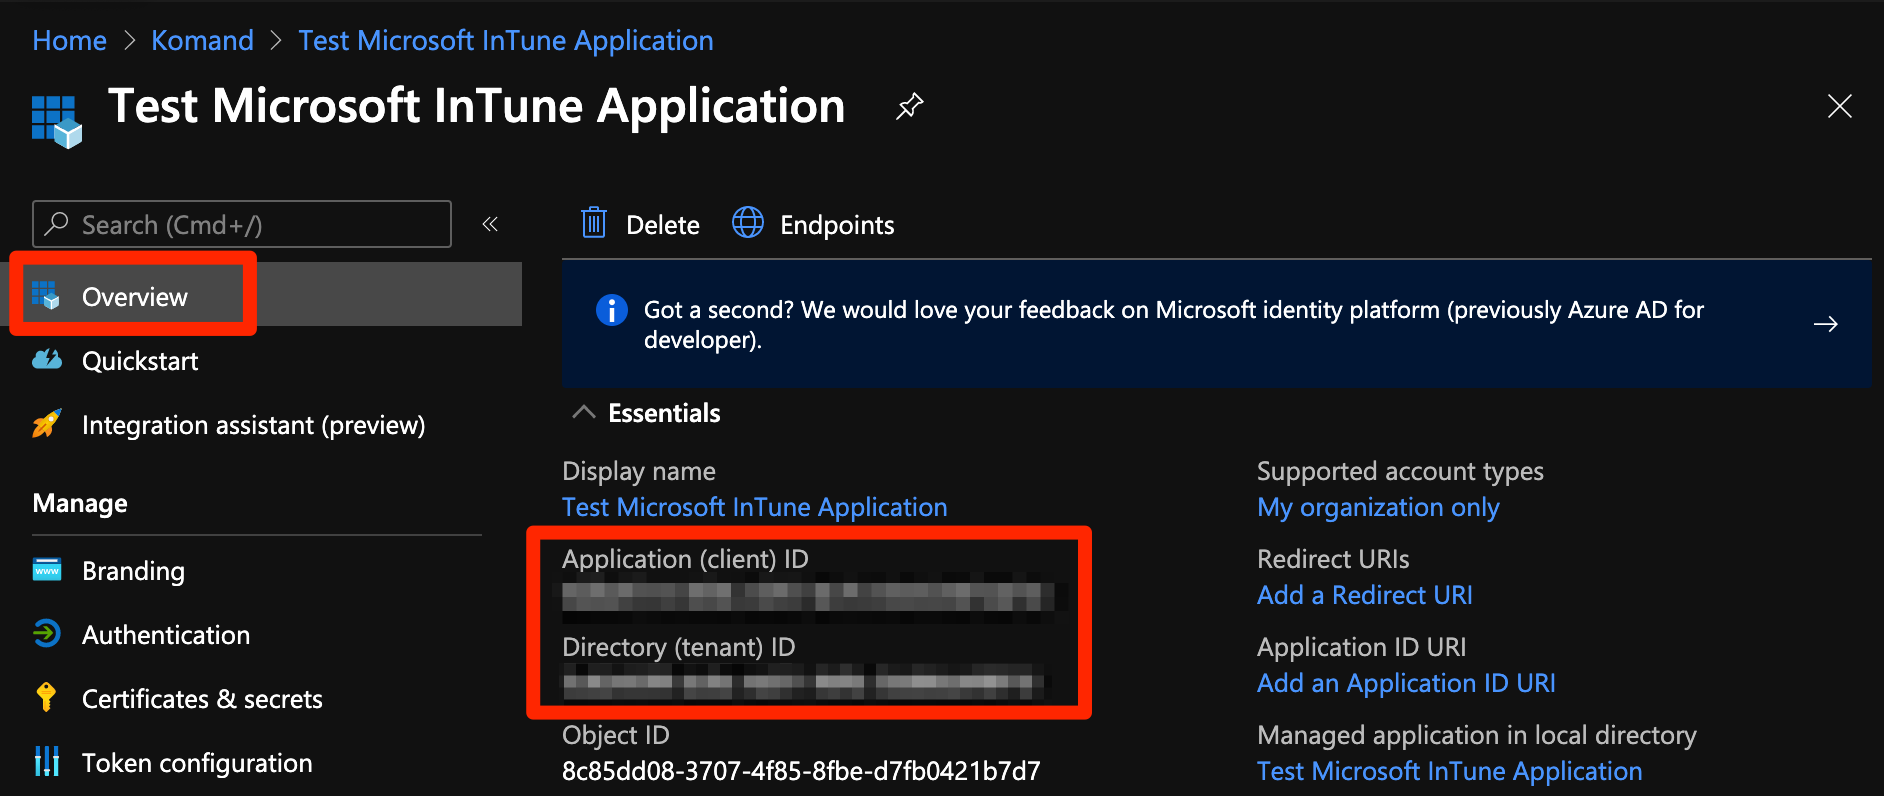 Application ID and Directory ID